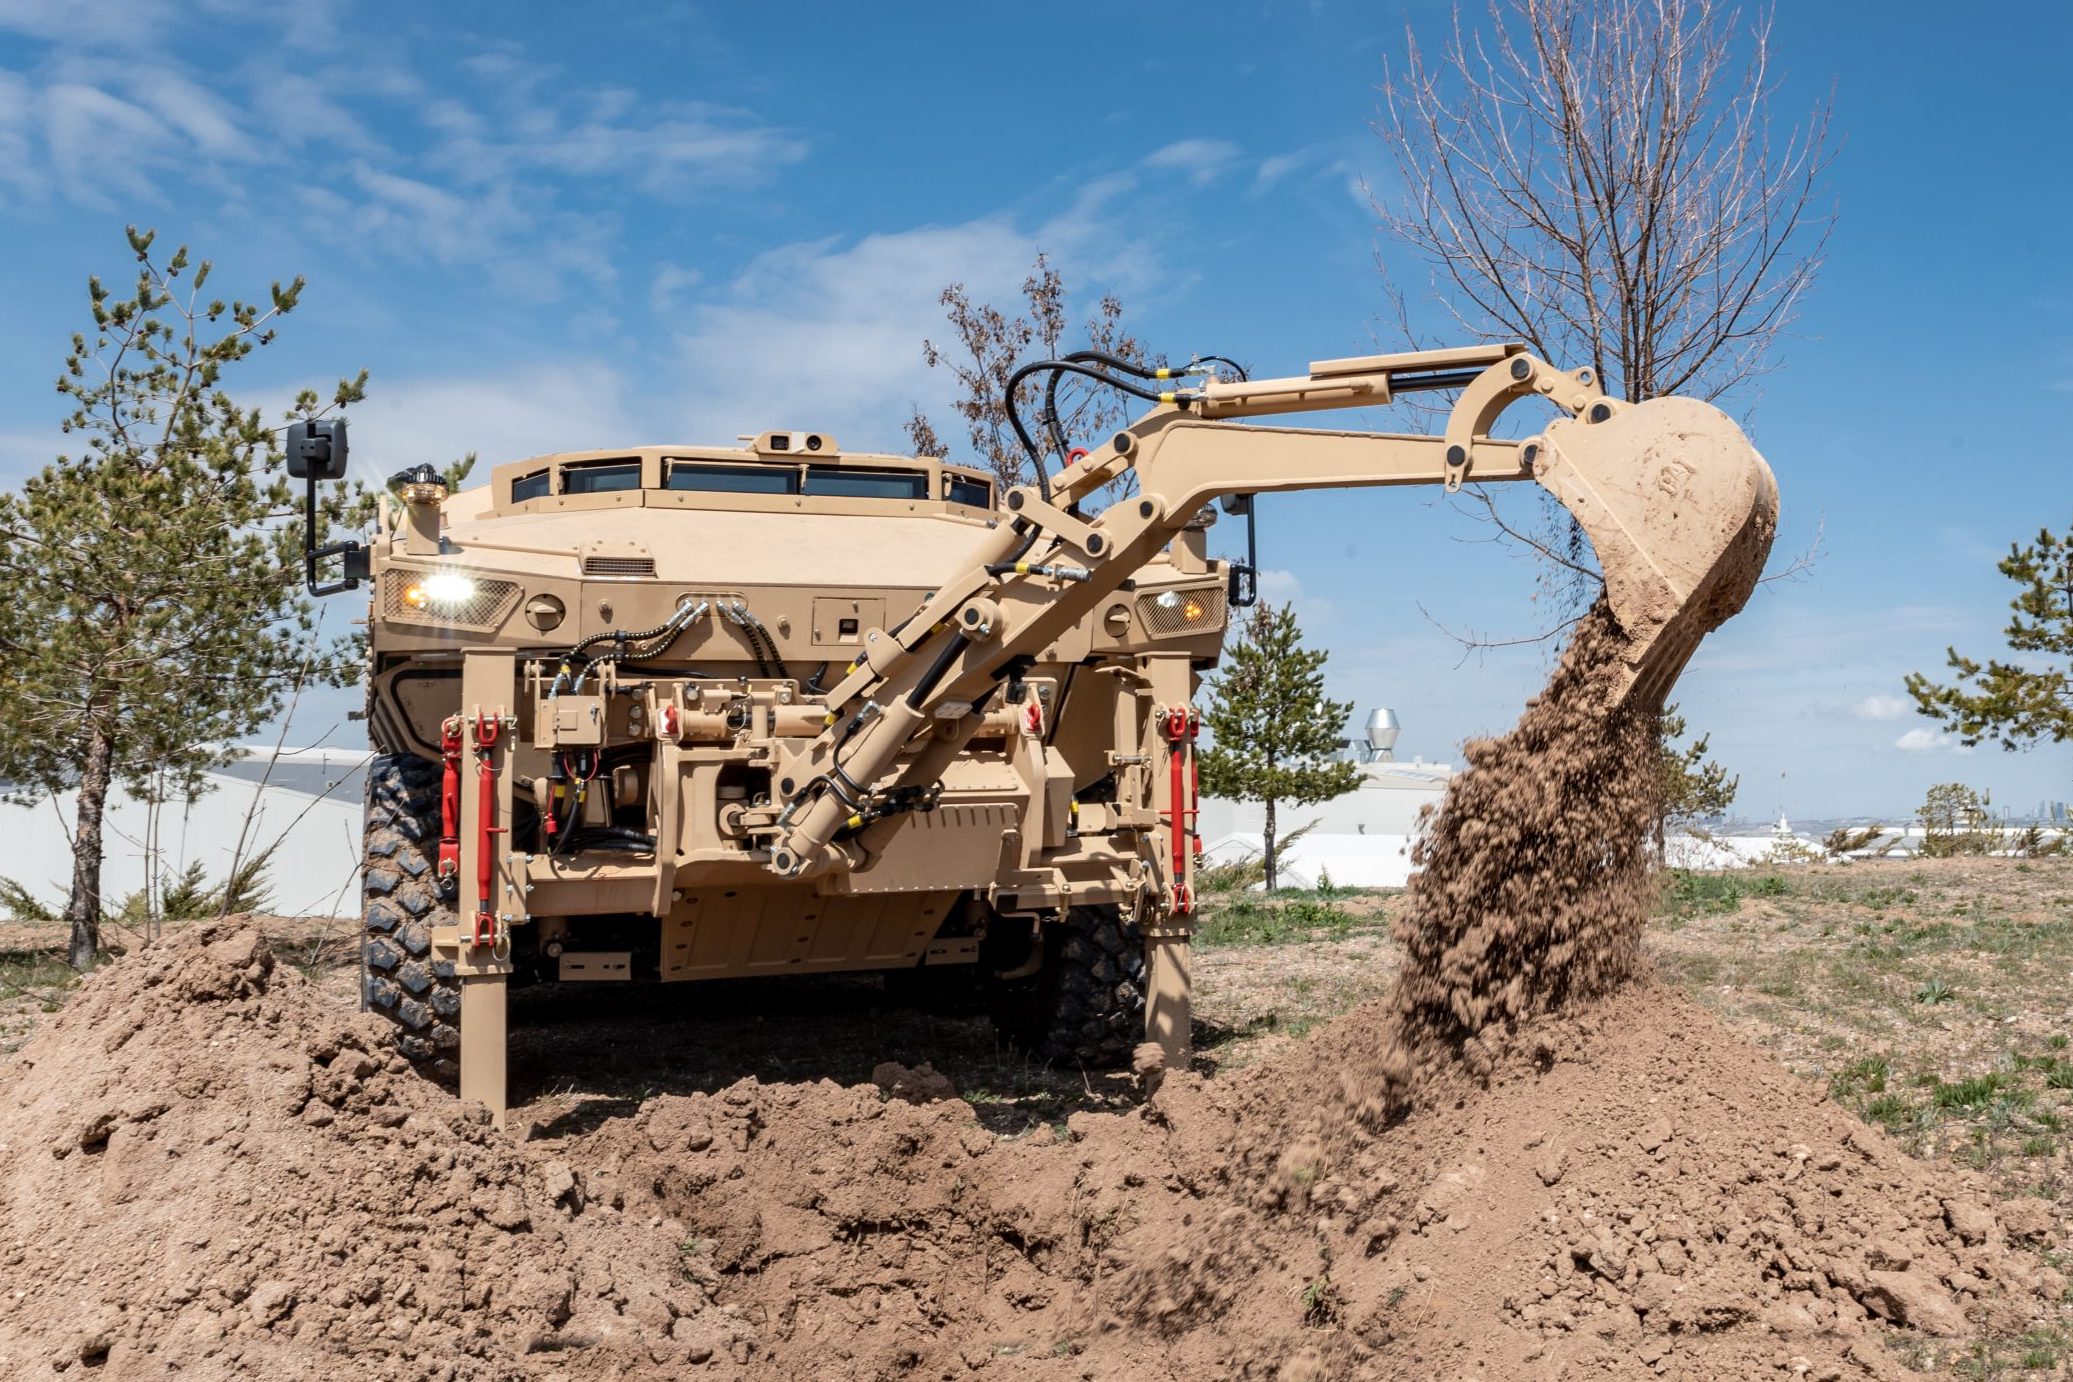 The Excavator Manipulator Arm is positioned to dig, demolish, remove obstacles and fill trenches.